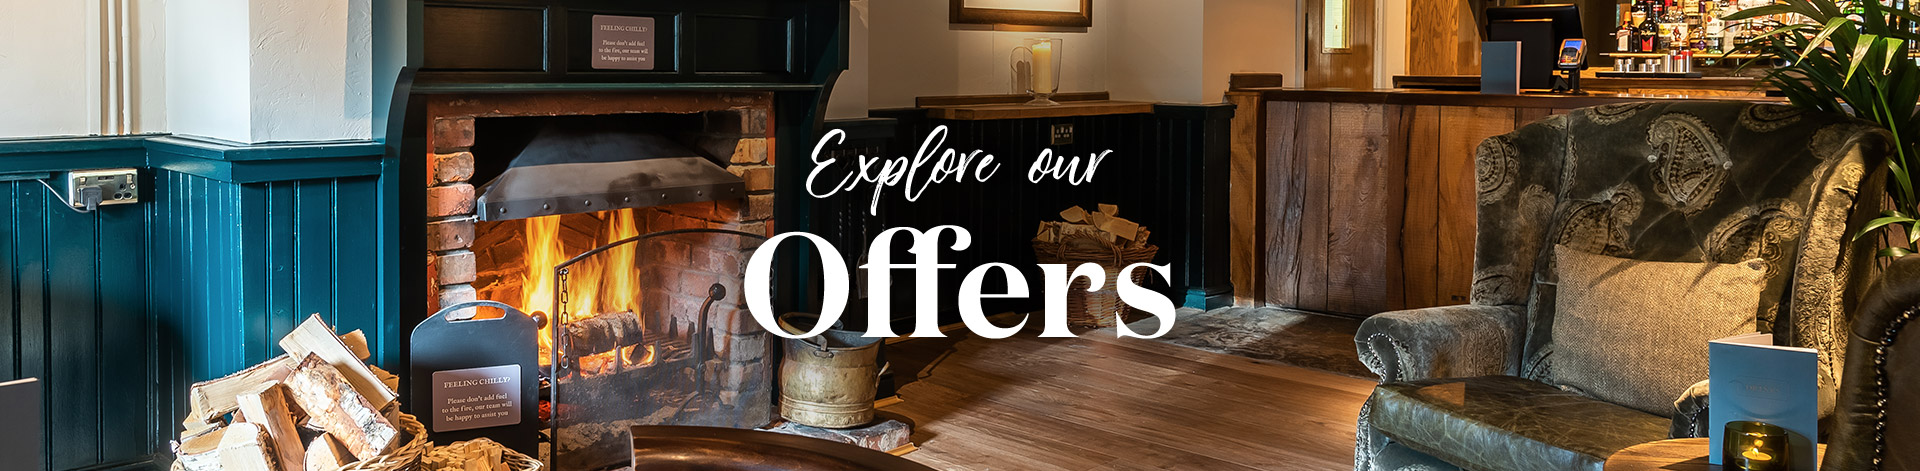 Our latest offers at The Packe Arms